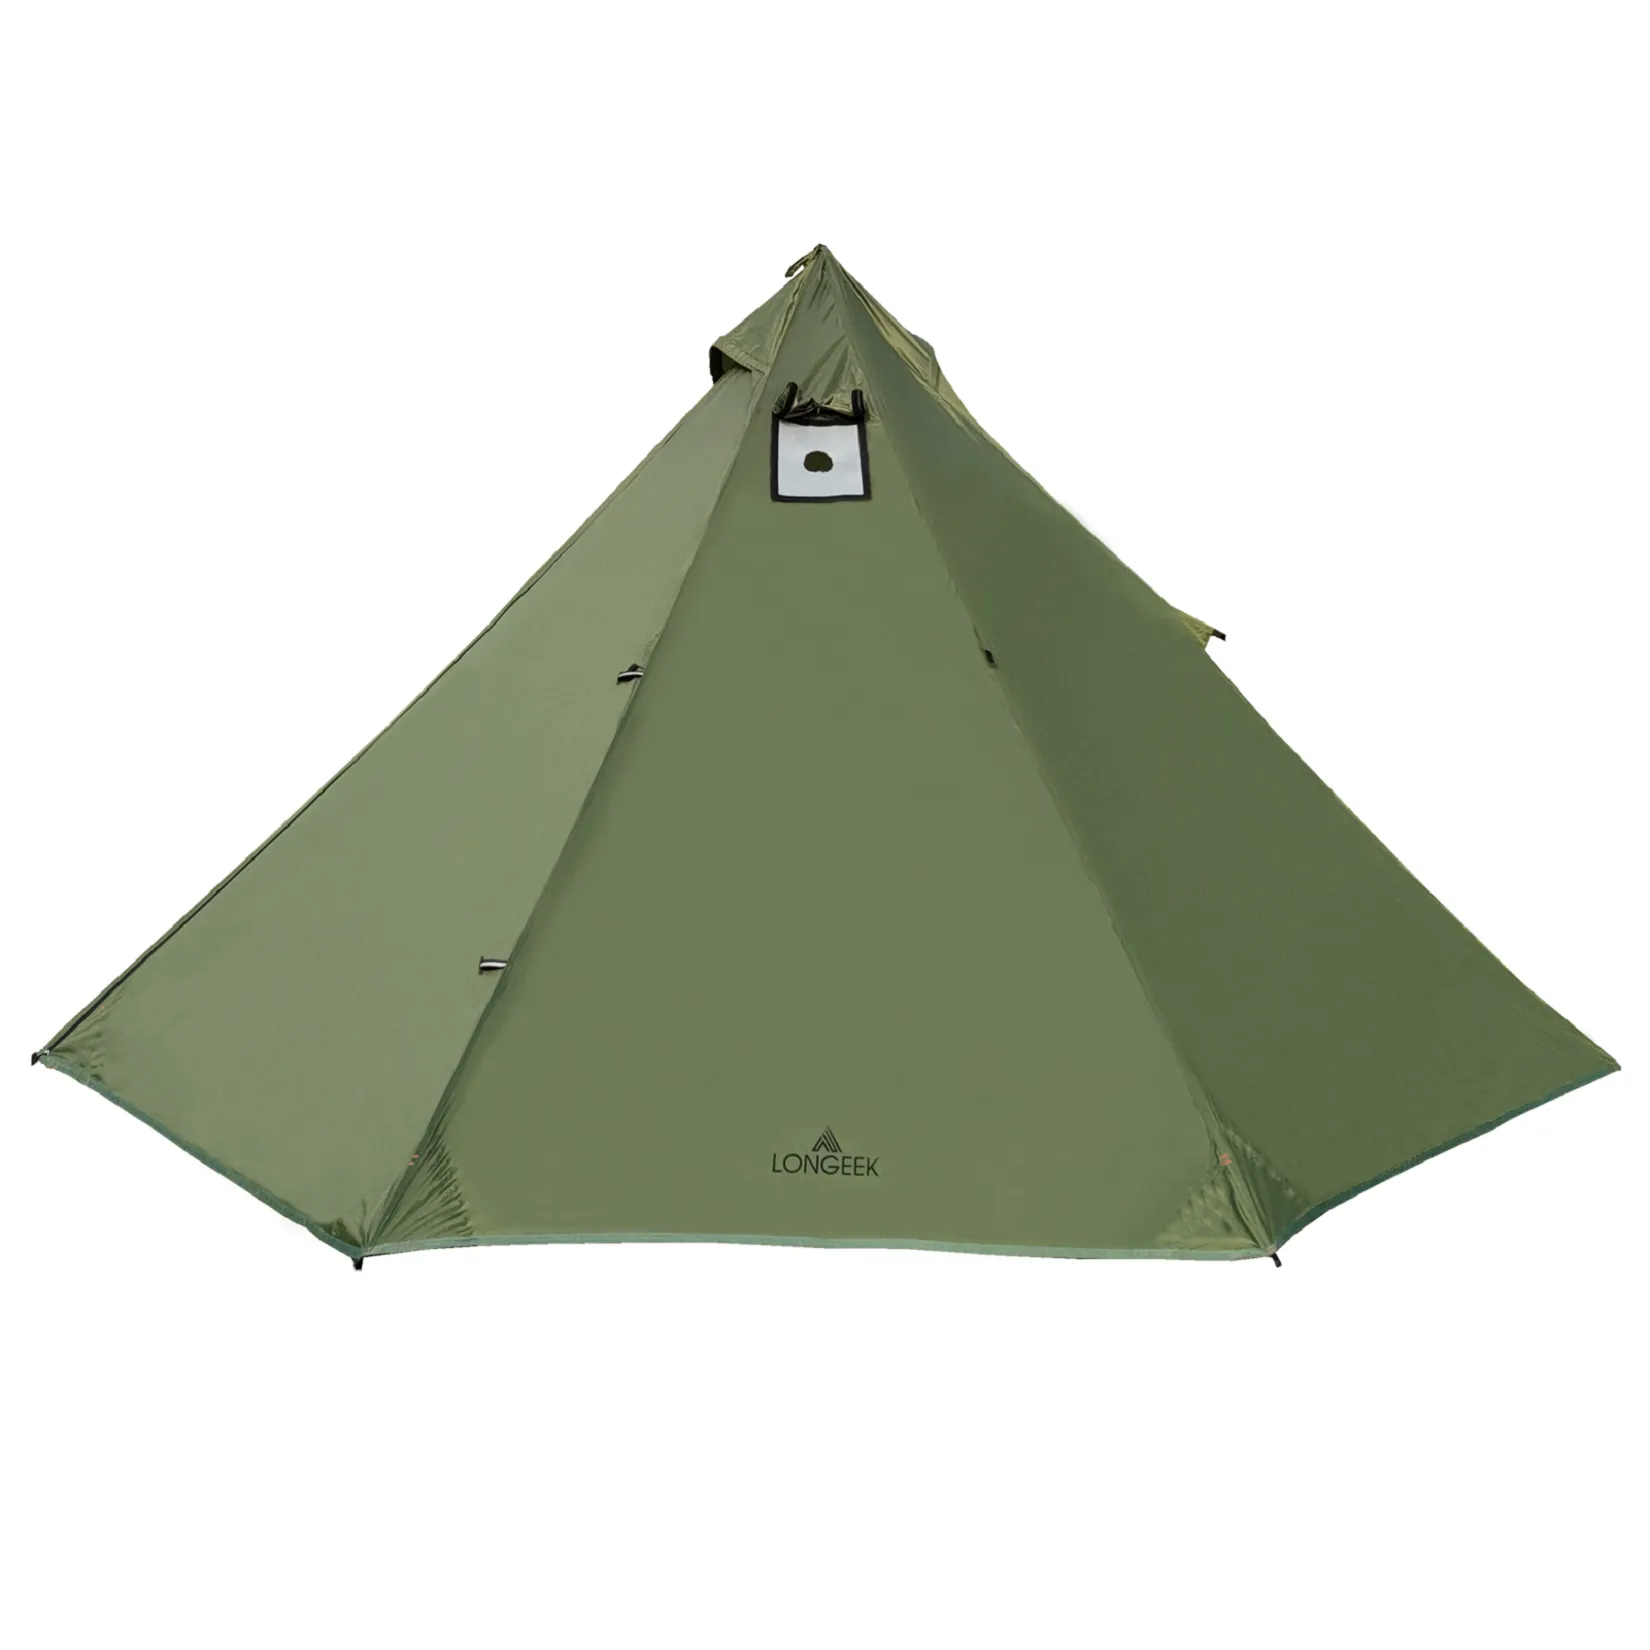 Longeek 2 Person Camping Tent 4 Seasons Backpacking Ultralight Easy Up Hot Tipi - $217.60